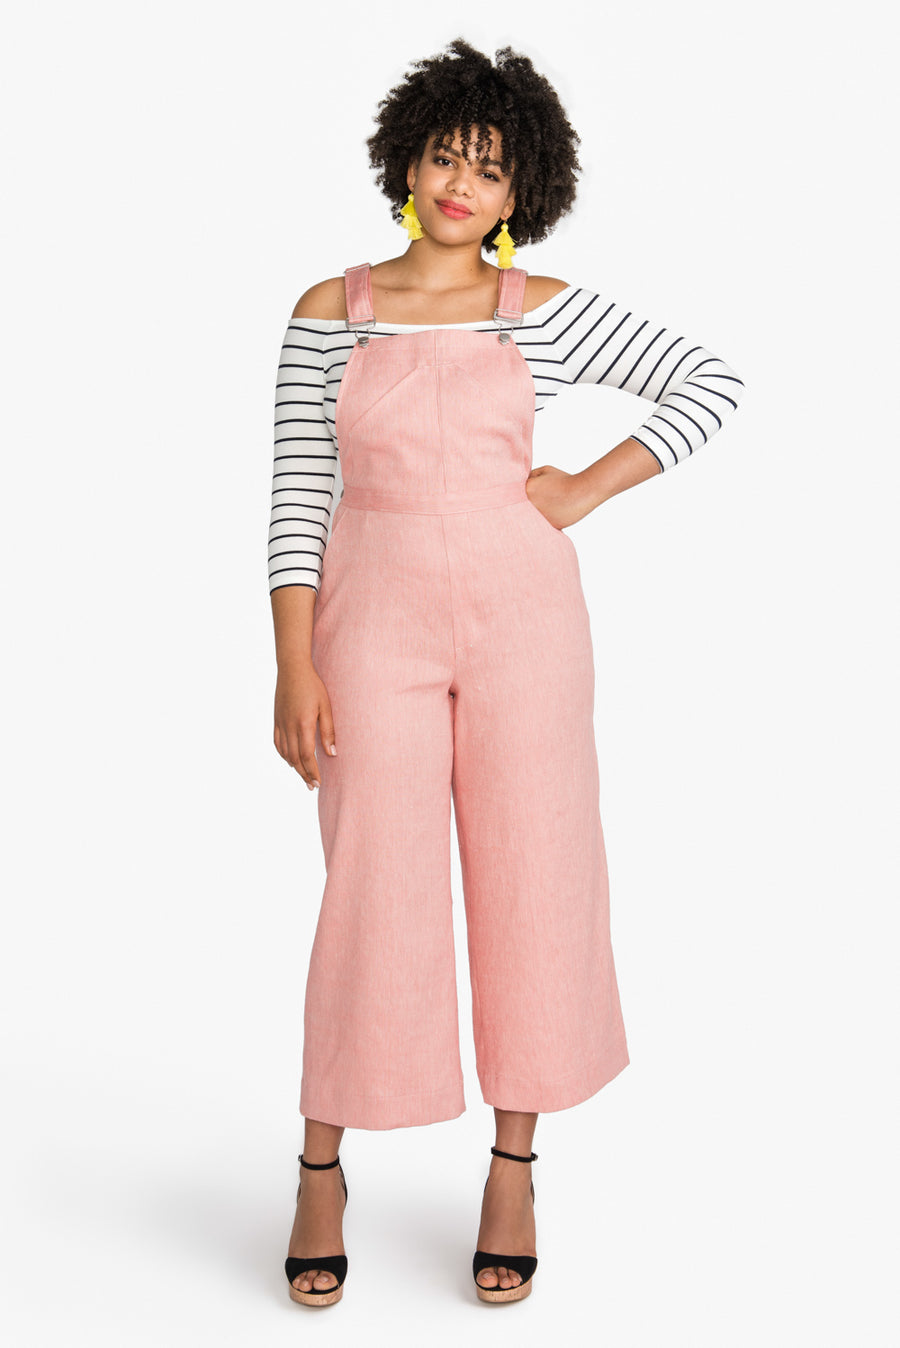 Jenny Overalls Pattern | Dungarees Sewing Pattern // from Closet Core Patterns